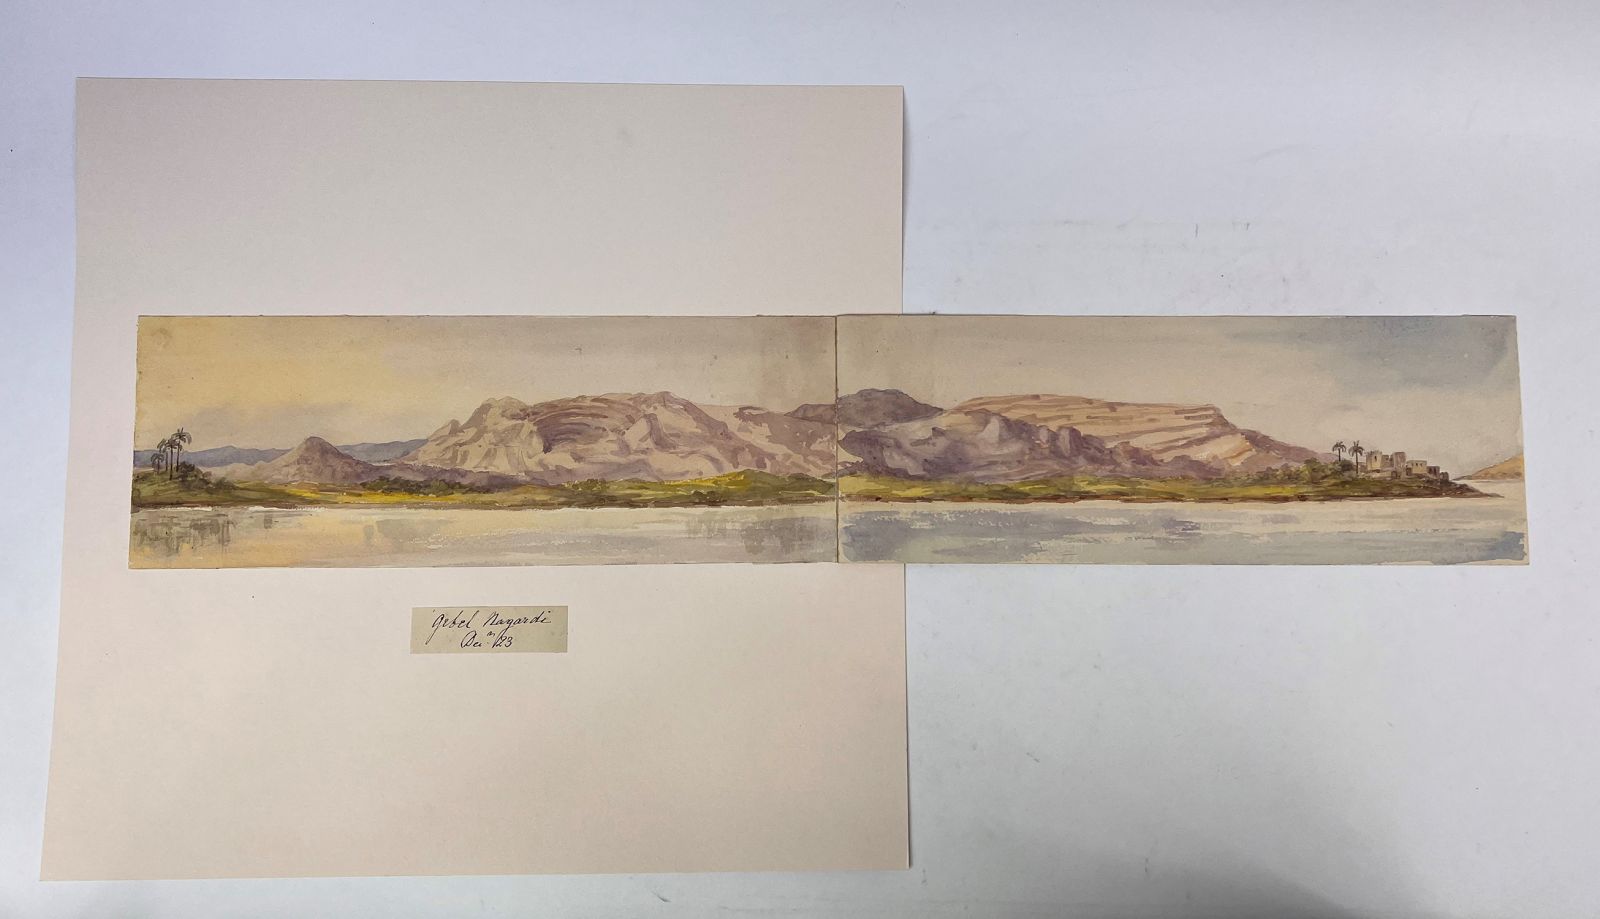 A FINE COLLECTION OF TWENTY-SEVEN EARLY WATERCOLOUR VIEWS OF THE NILE, PRODUCED DURING A WINTER CRUISE IN 1864-65, DEPICTING THE ANCIENT SITES AND LANDSCAPES OF UPPER EGYPT, NUBIA, AND THE SECOND CATARACT -  image 6